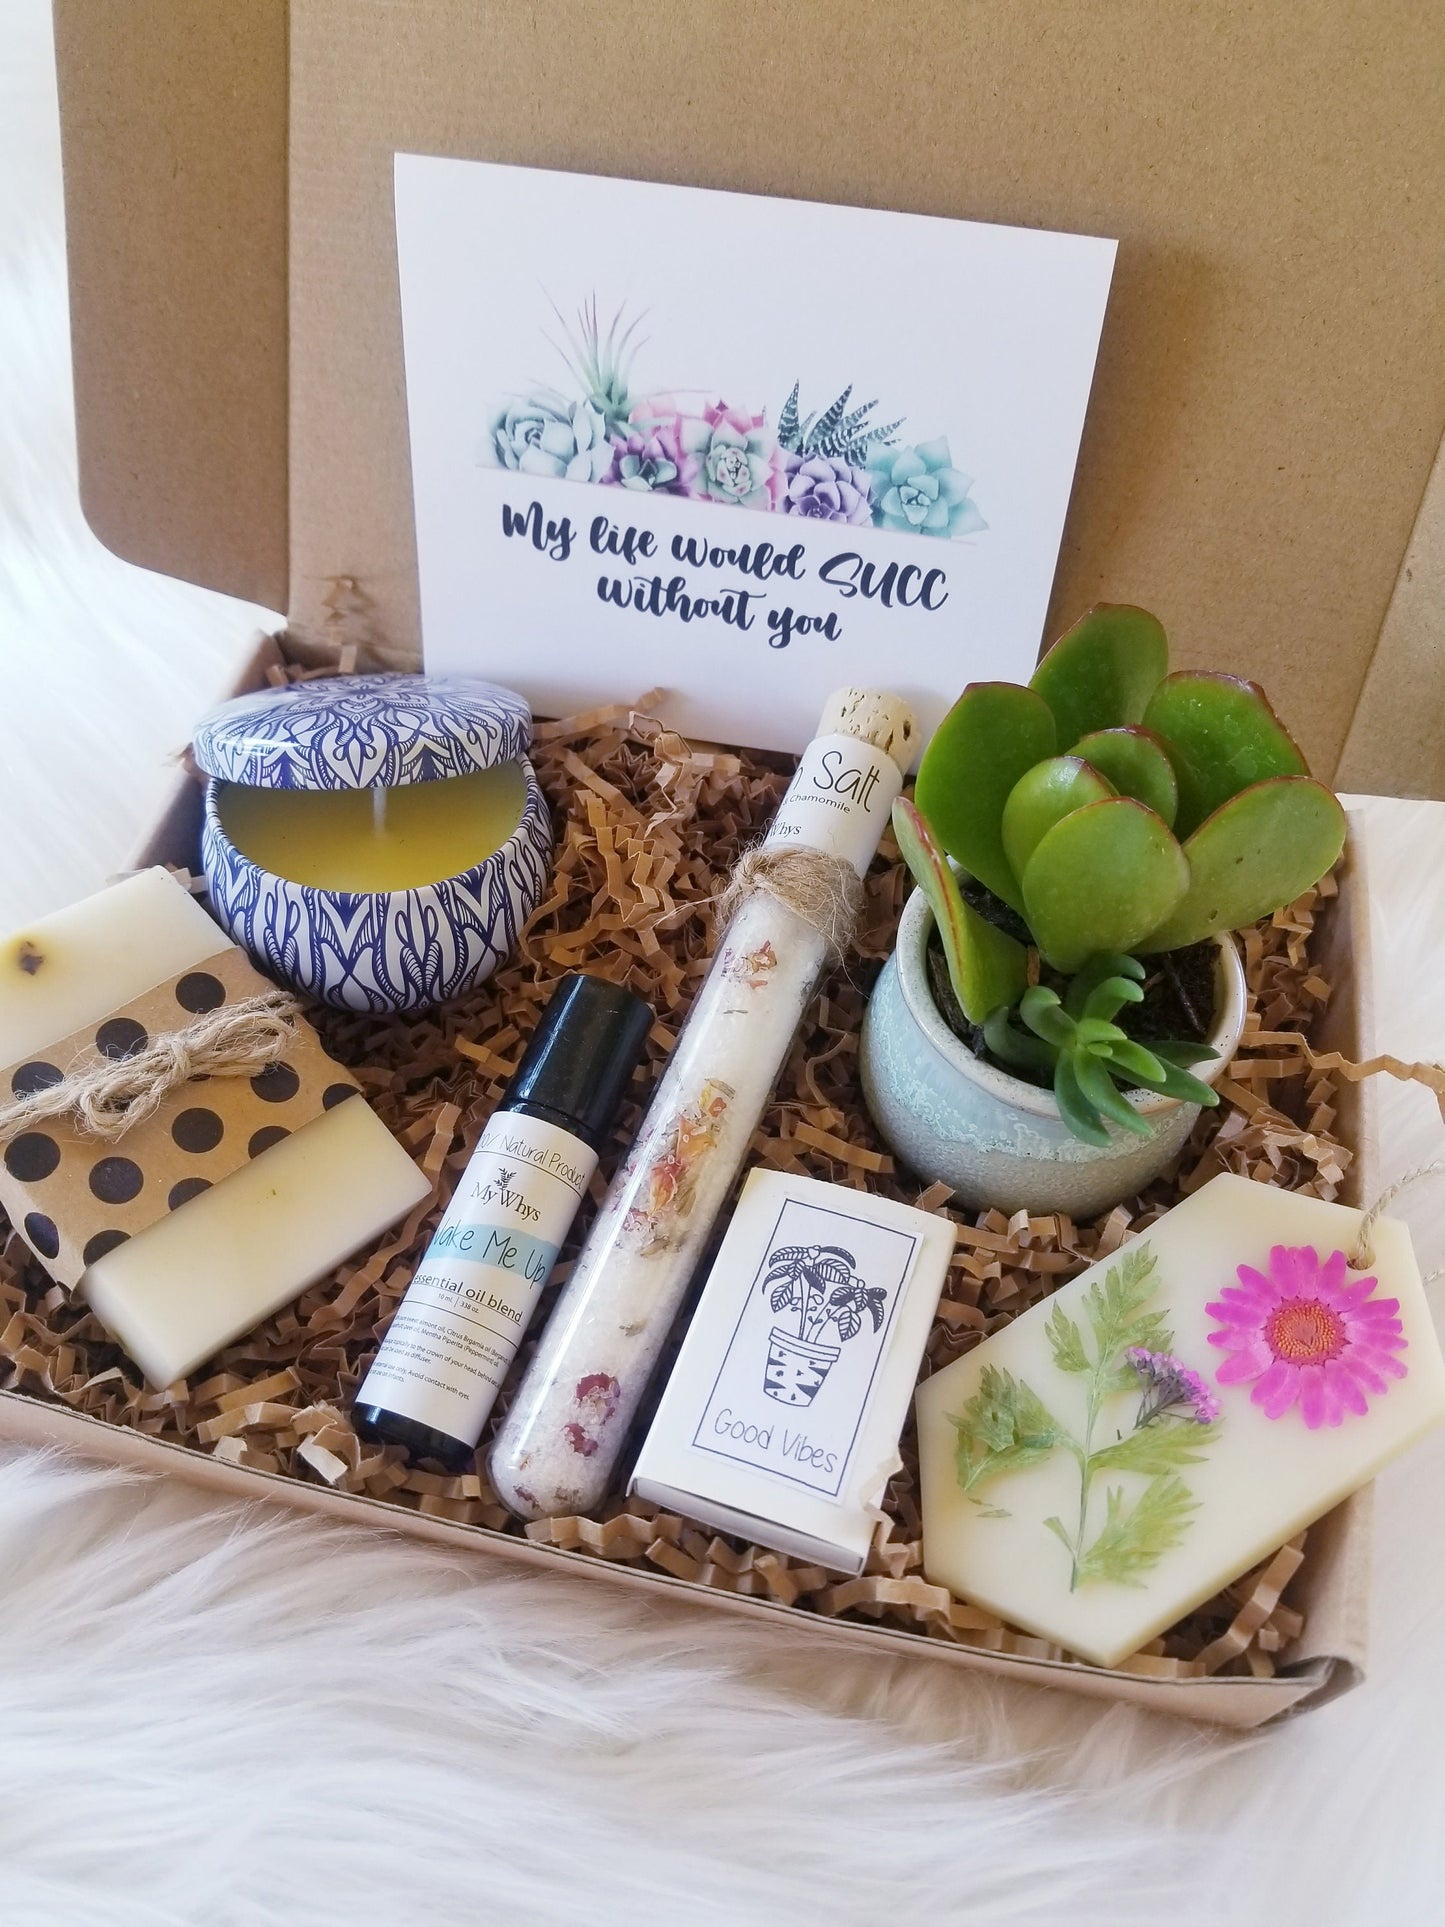 My life would SUCC without you - spa gift set, Thinking of you care package